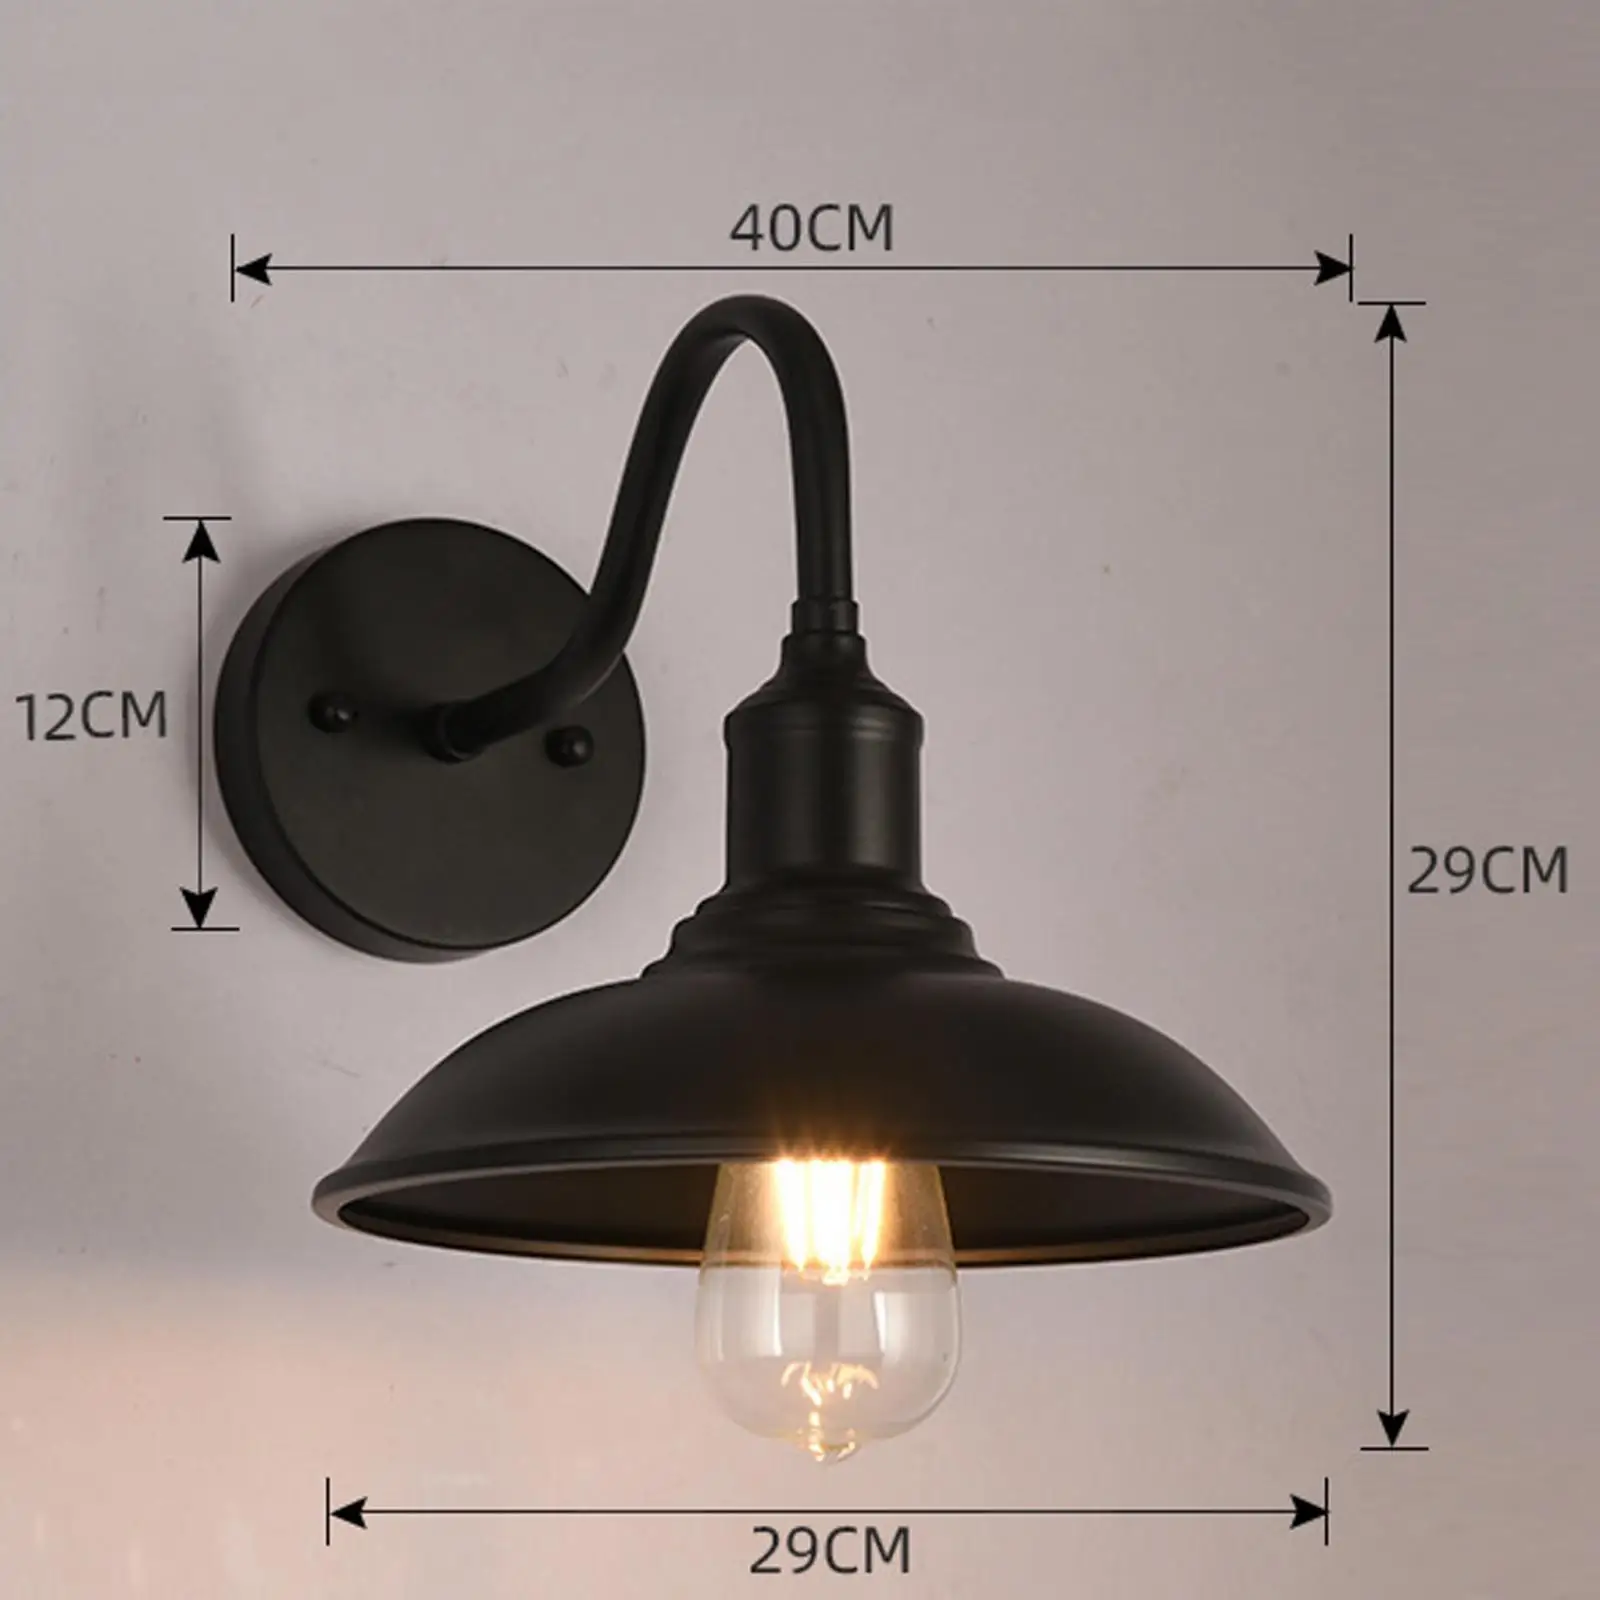 Industrial Wall Sconce Lamp E27 Decorative Metal Vintage Wall Light Bedside Lamp for Decoration Garden Farmhouse Kitchen Hallway